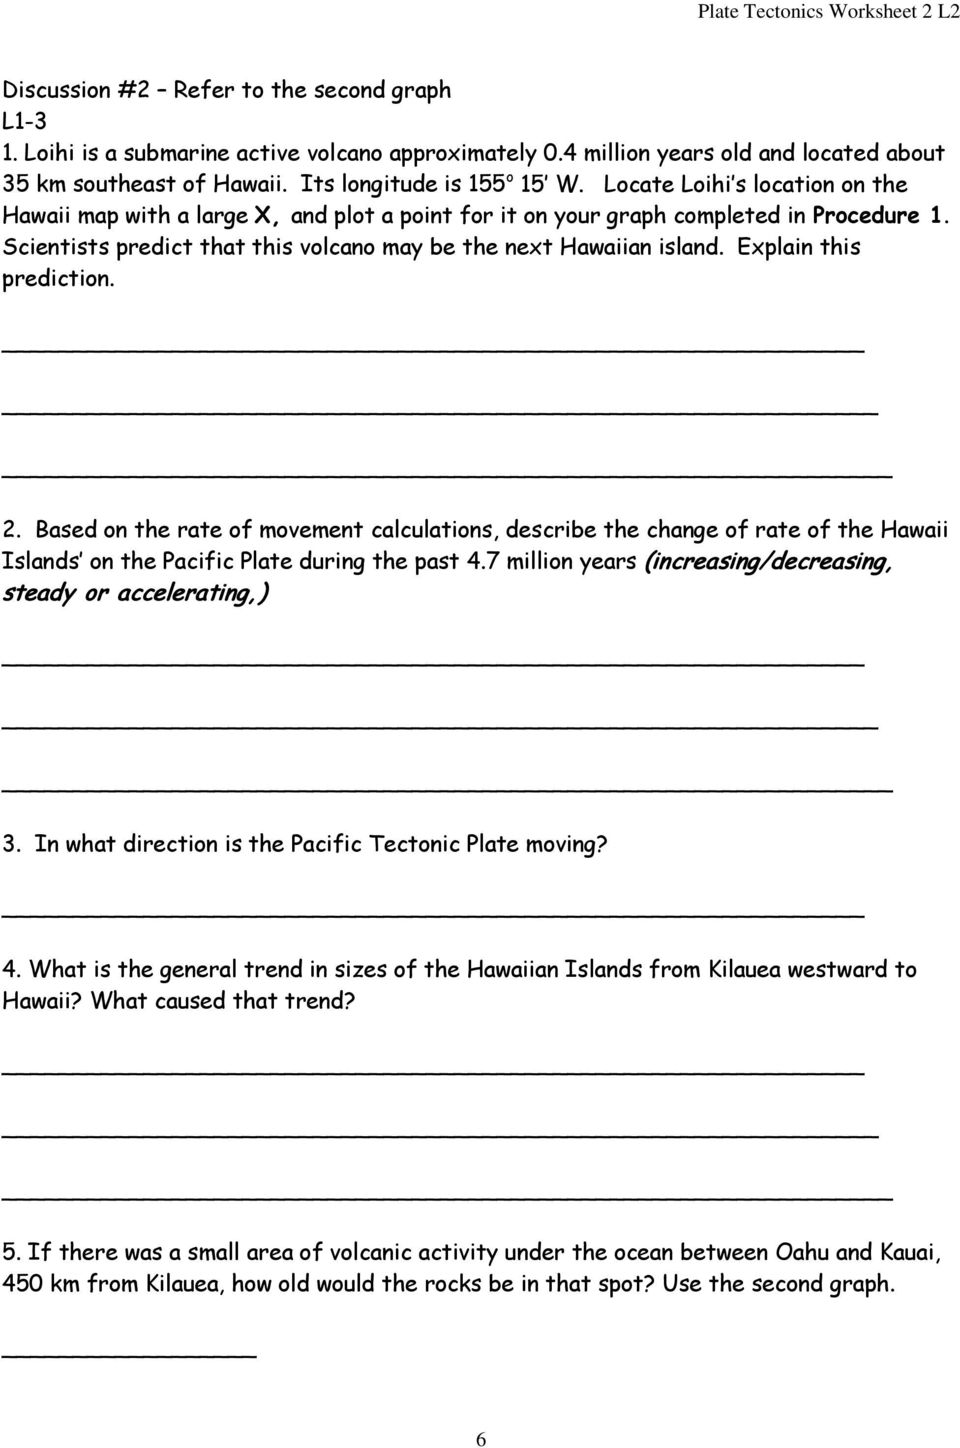 MiSP Plate Tectonics Worksheet #244 L244 - PDF Free Download Pertaining To Plate Boundary Worksheet Answers